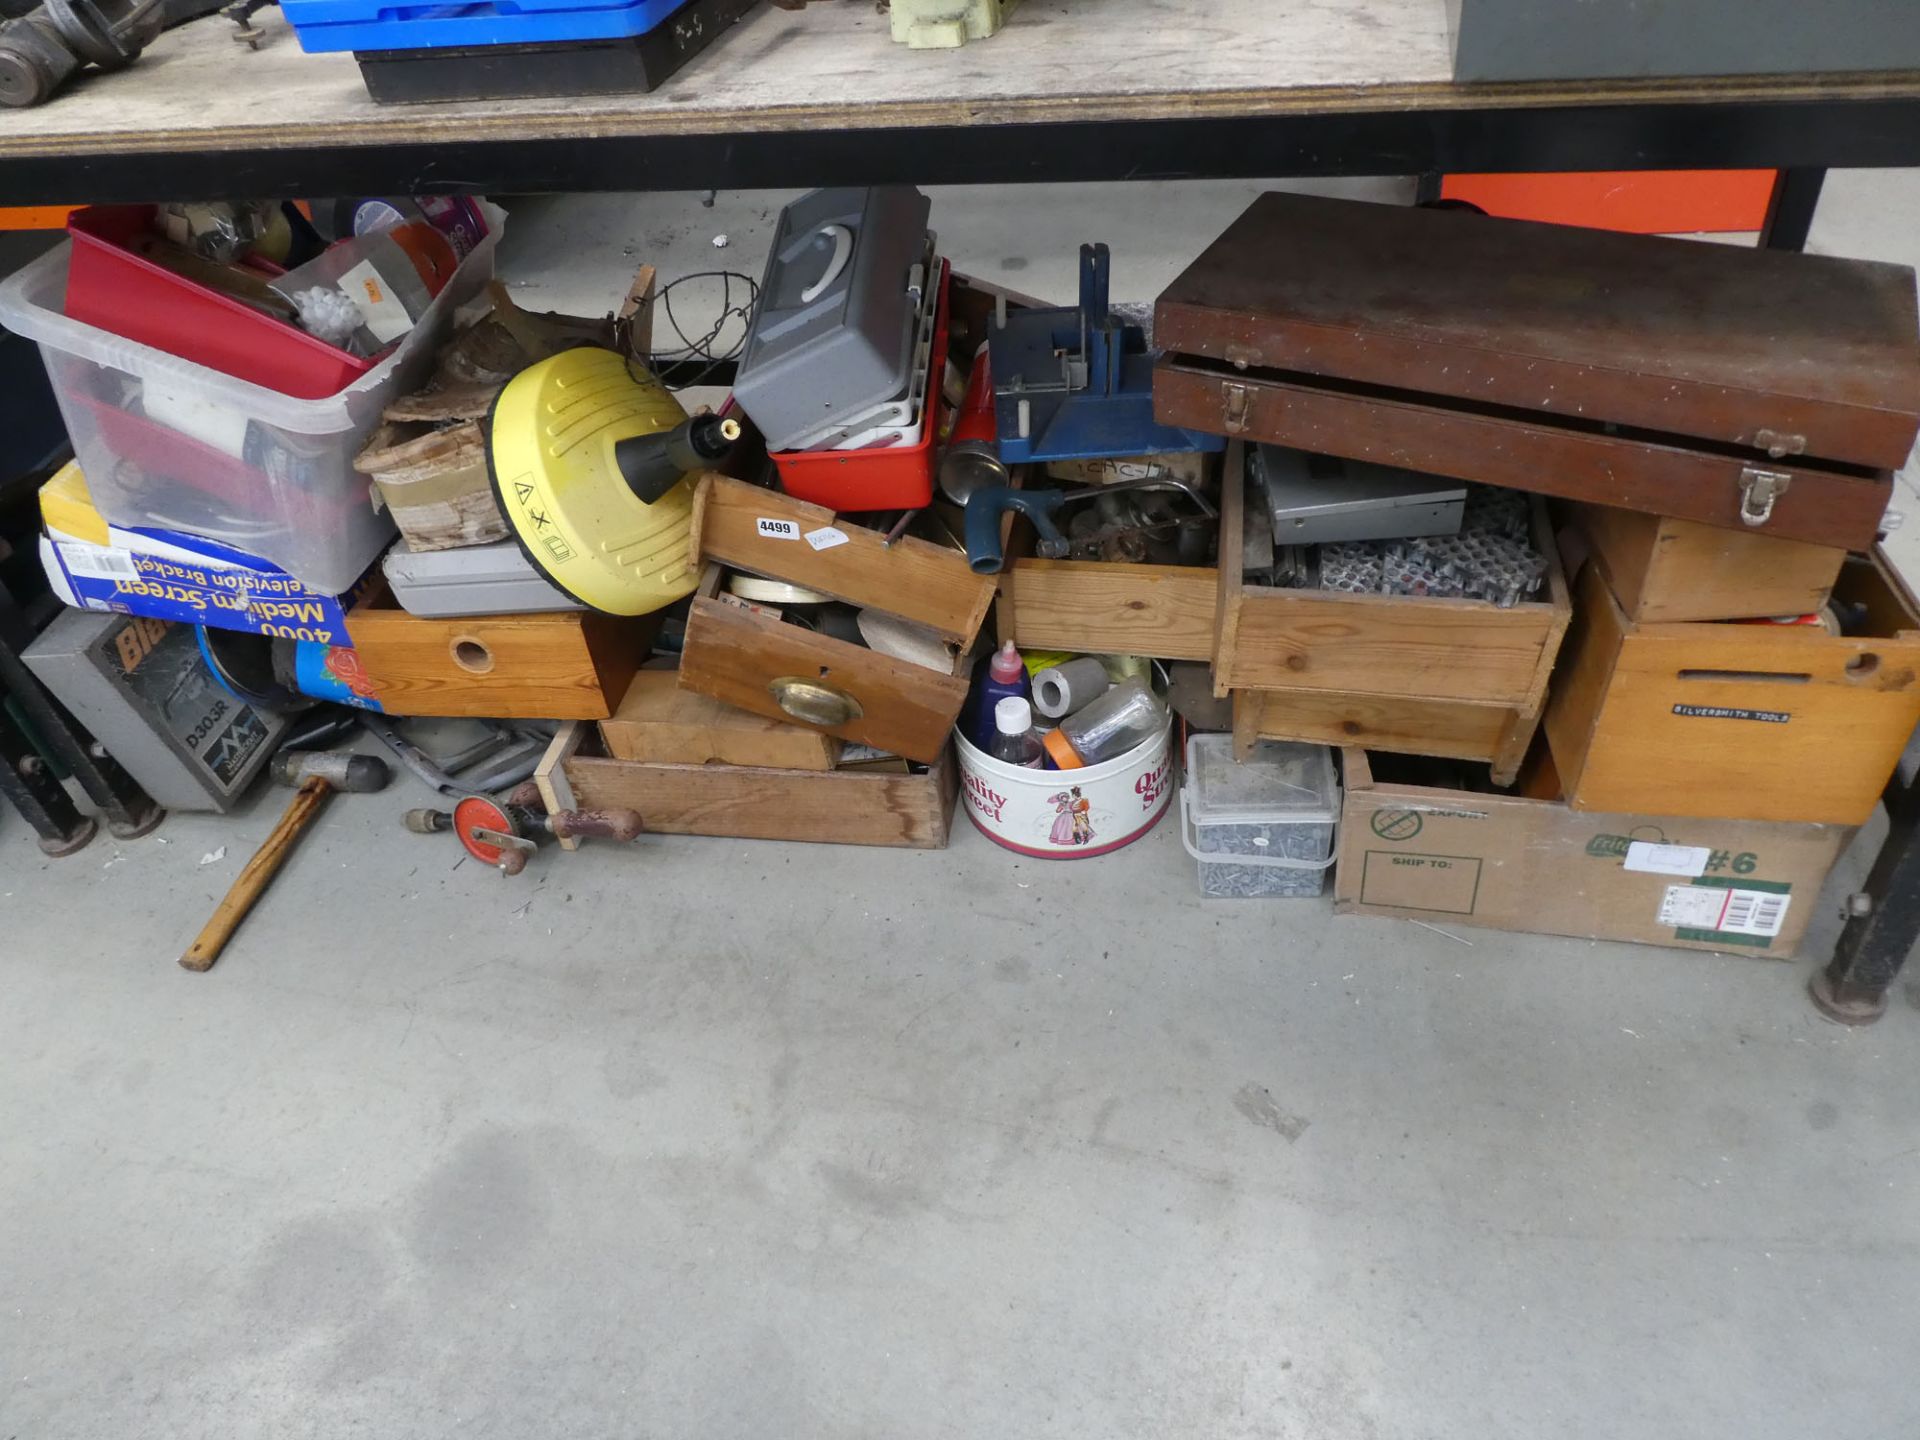 Large under bay of assorted tools, fixings, wooden boxes, etc